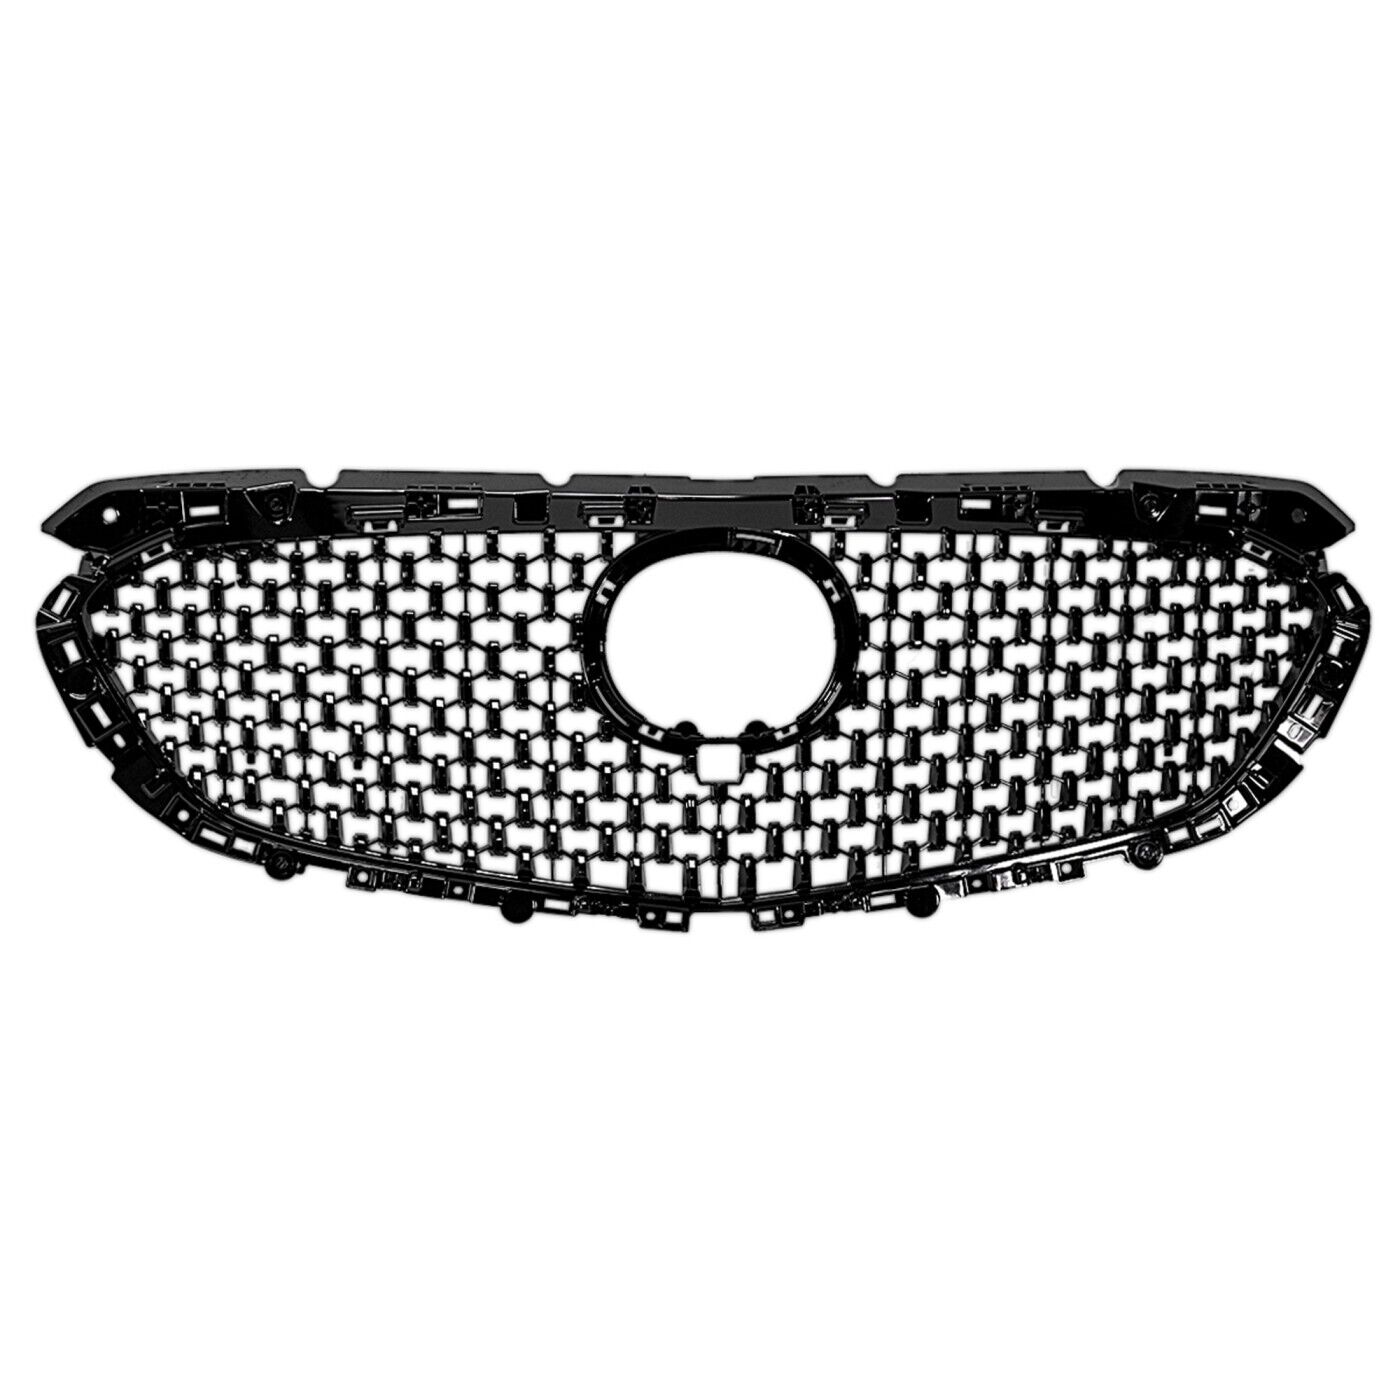 Grille Assembly For 2018-2020 Mazda 6 Textured Black Shell with Chrome Insert